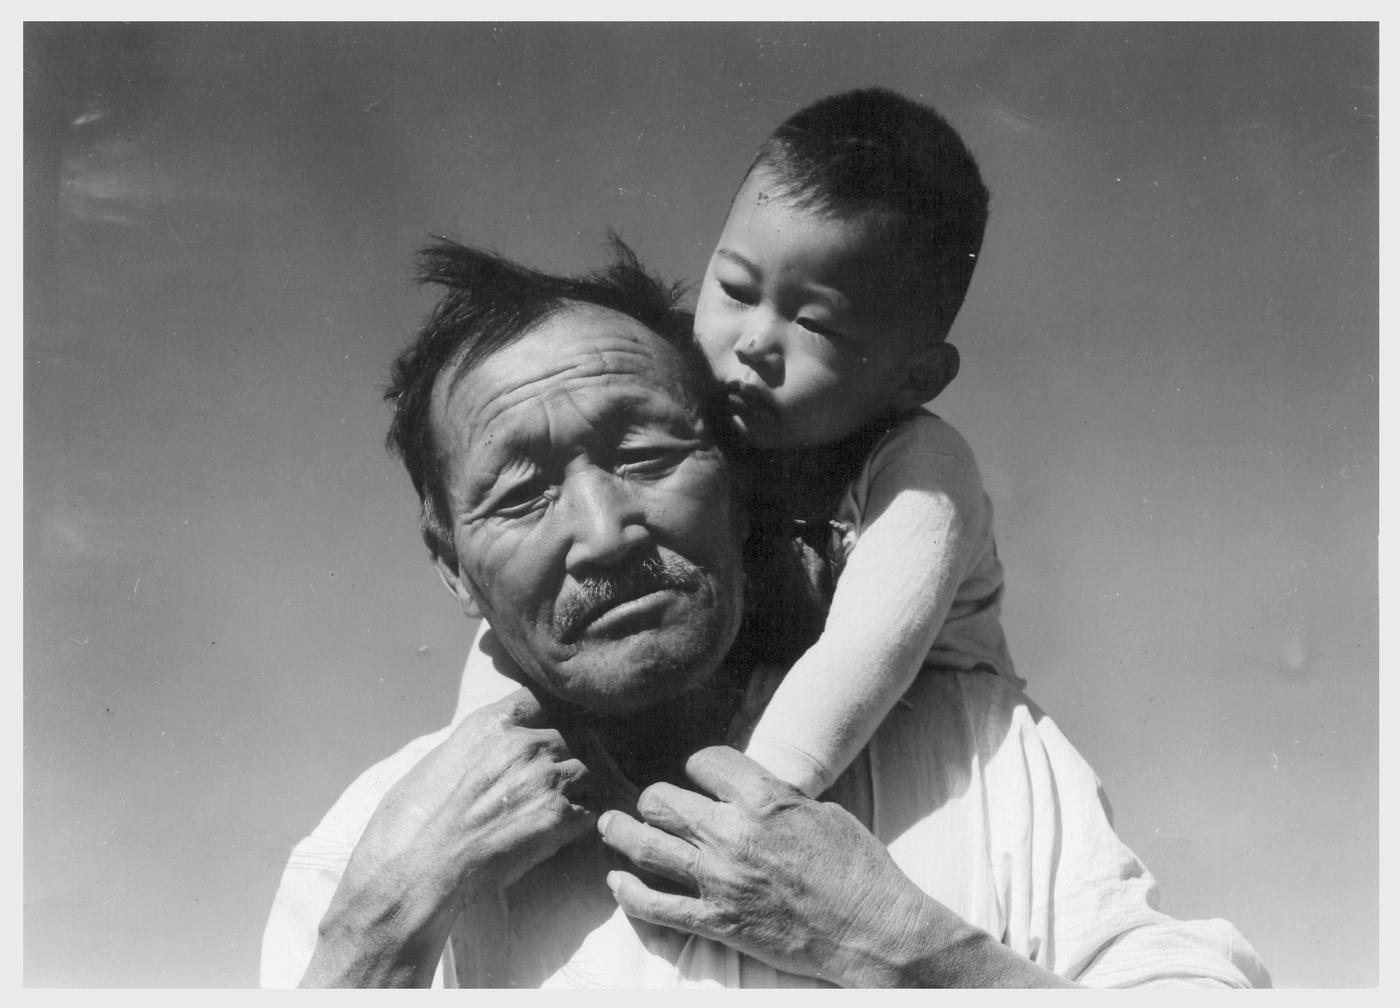 : Manzanar Relocation Center, Manzanar, California. Grandfather and grandson of Japanese ancestry at this War Relocation Authority center.